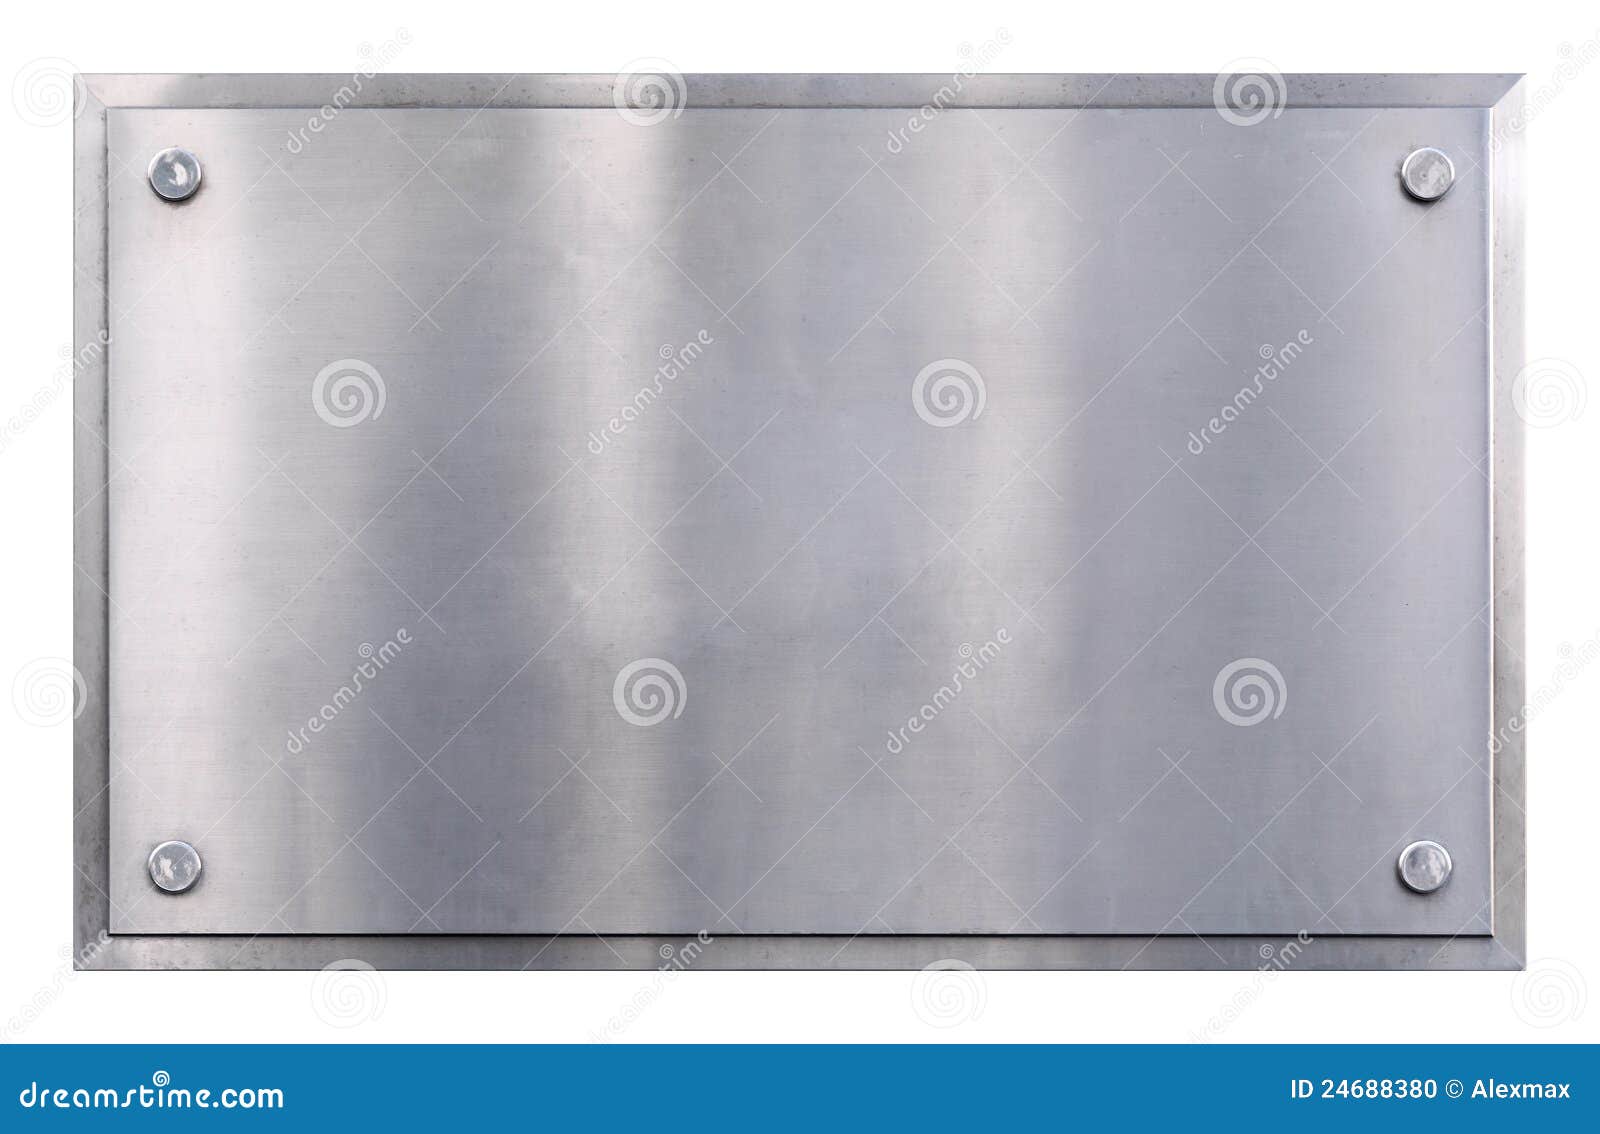 Brushed Steel Metal Plate Background With Rivets Stock Photo, Picture and  Royalty Free Image. Image 35270564.